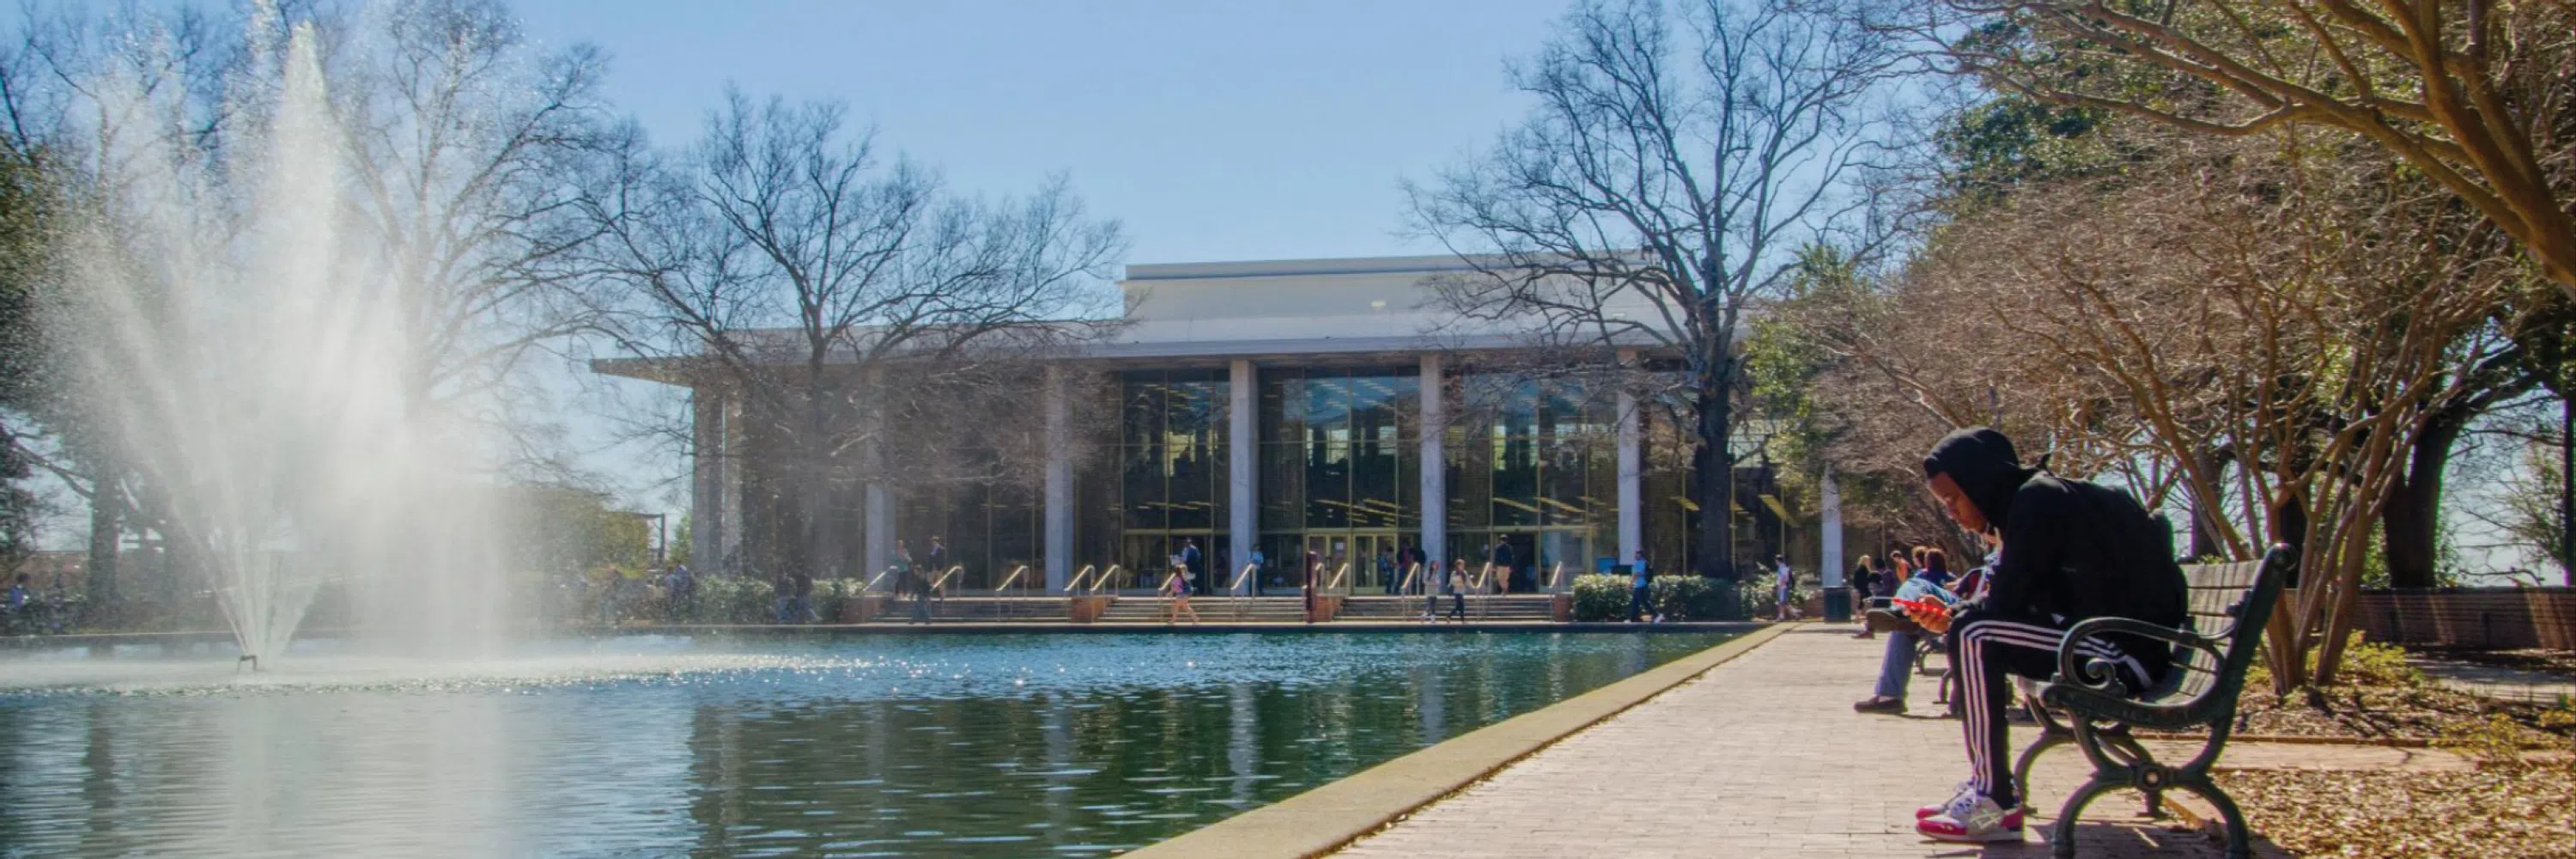 View of the Thomas Cooper Library and the reflecting pool